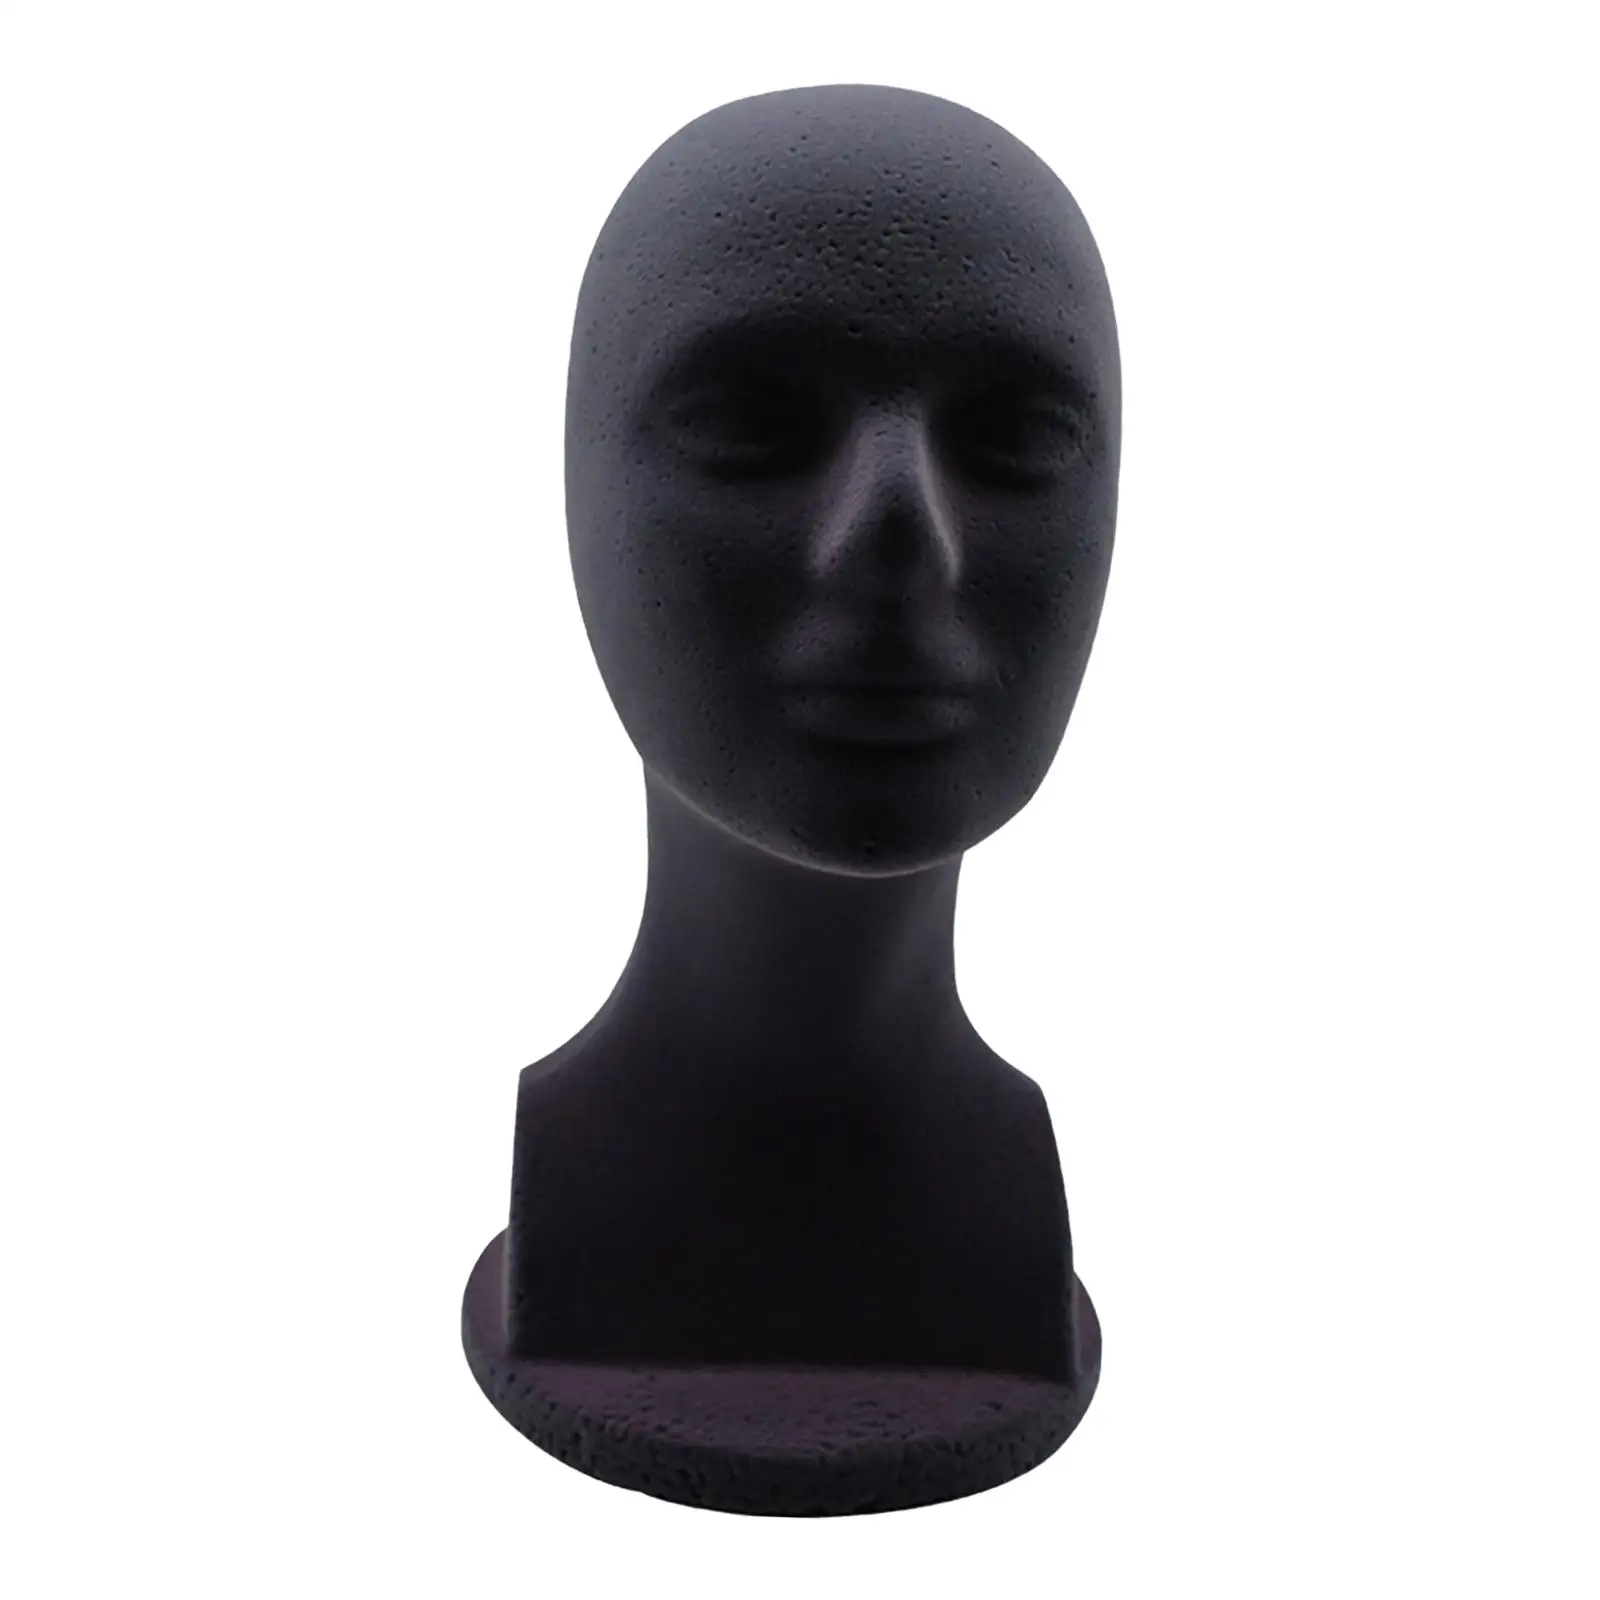 Man Styrofoam Mannequin Head Model Hat Display Stand Black Multi Functional for Professional or Personal Use Sturdy Stable Base